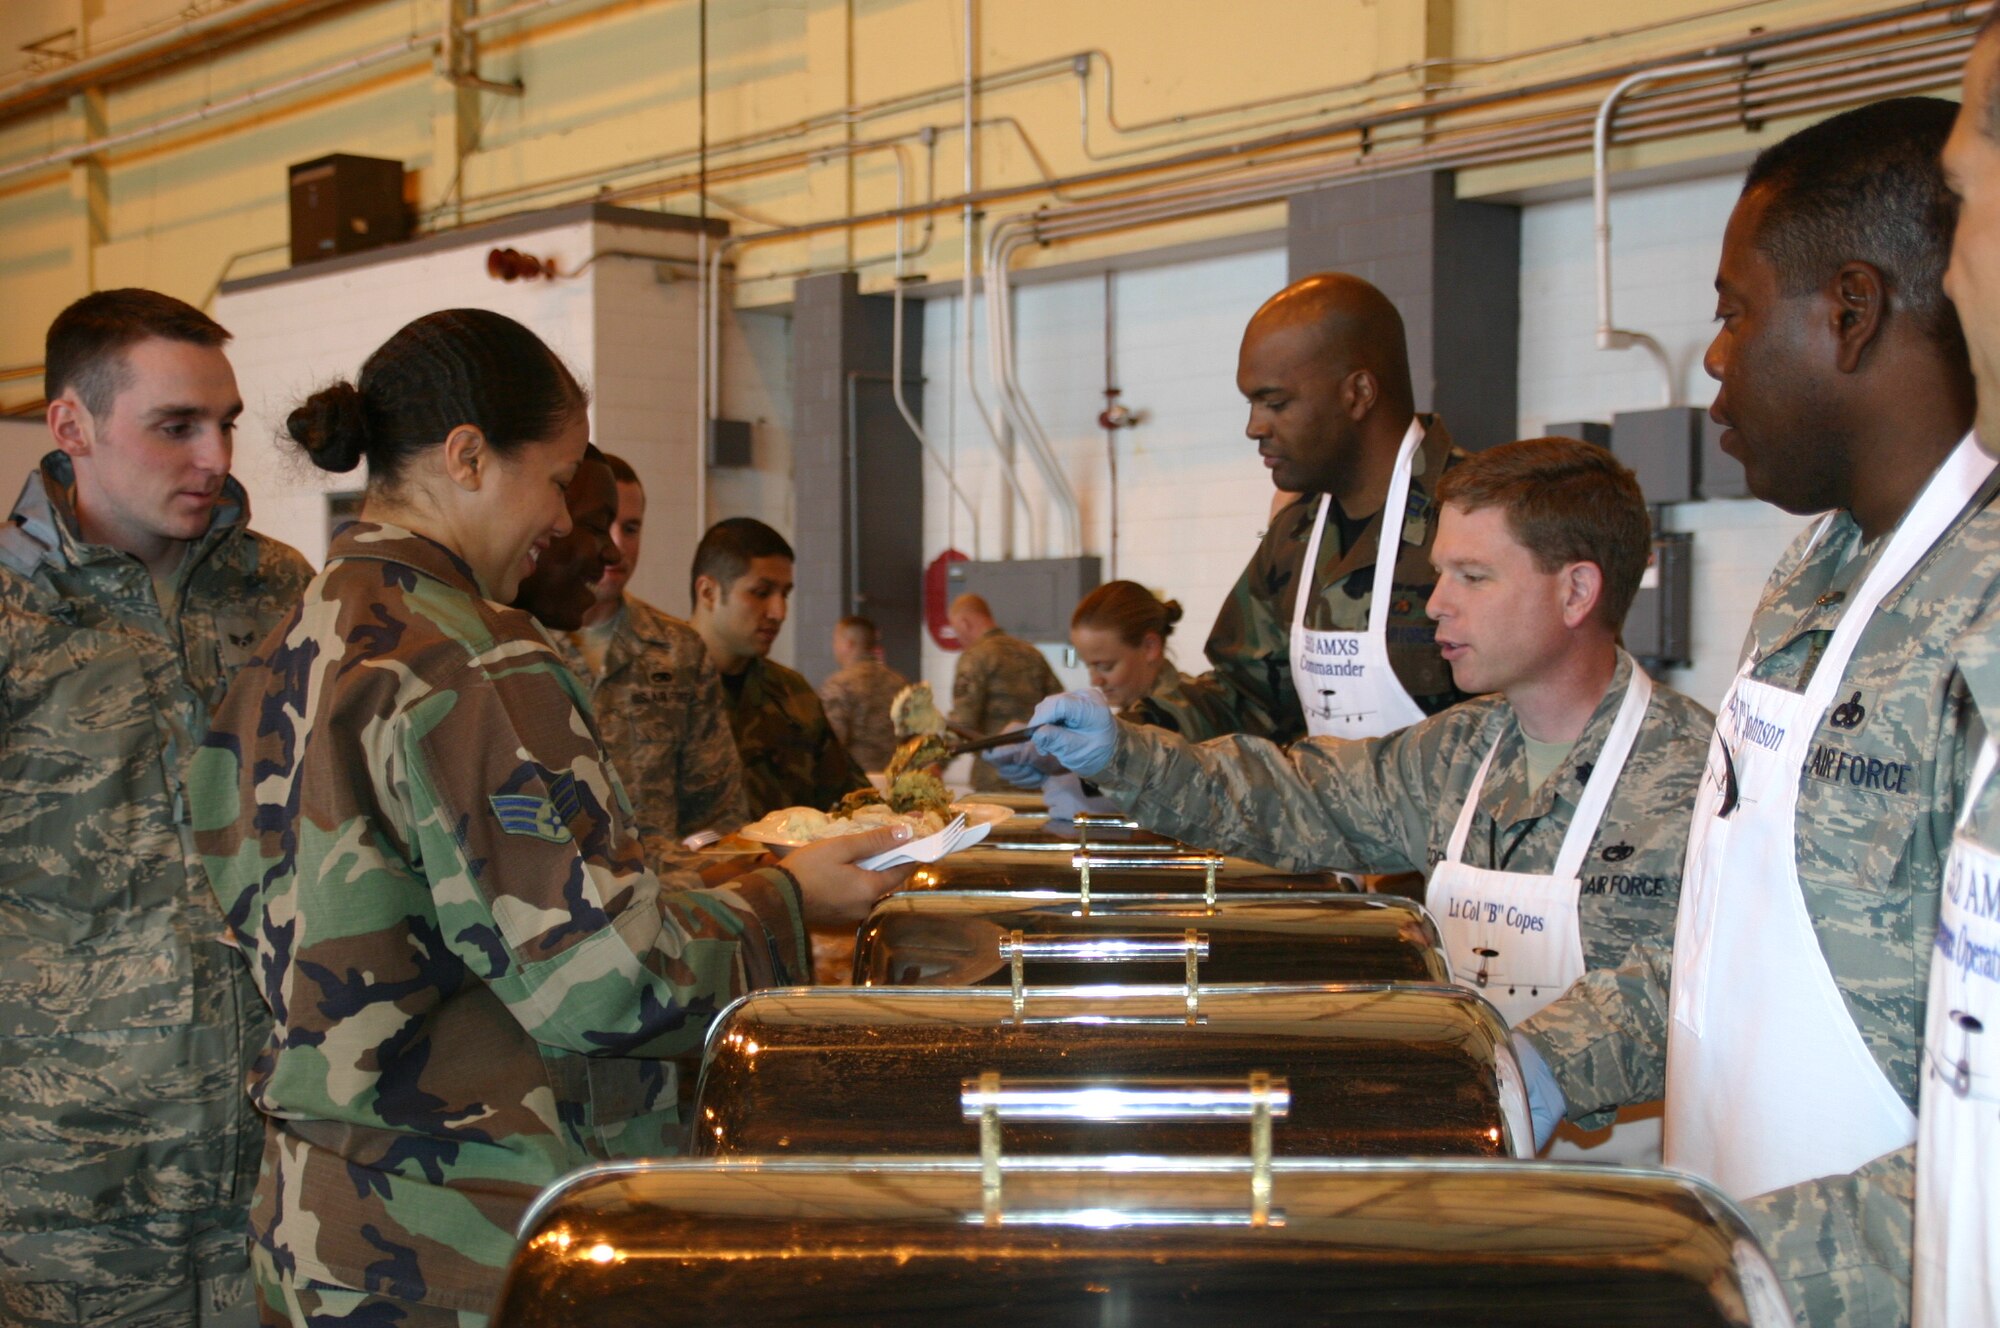 Lt. Col. Robert Copes, commander, 552nd Maintenance Squadron, serves a heaping scoop of stuffing to one of the deserving Airmen at the MXG Turkey Feast November 20. Photo compliments of 1st Lt. Kinder Blacke.